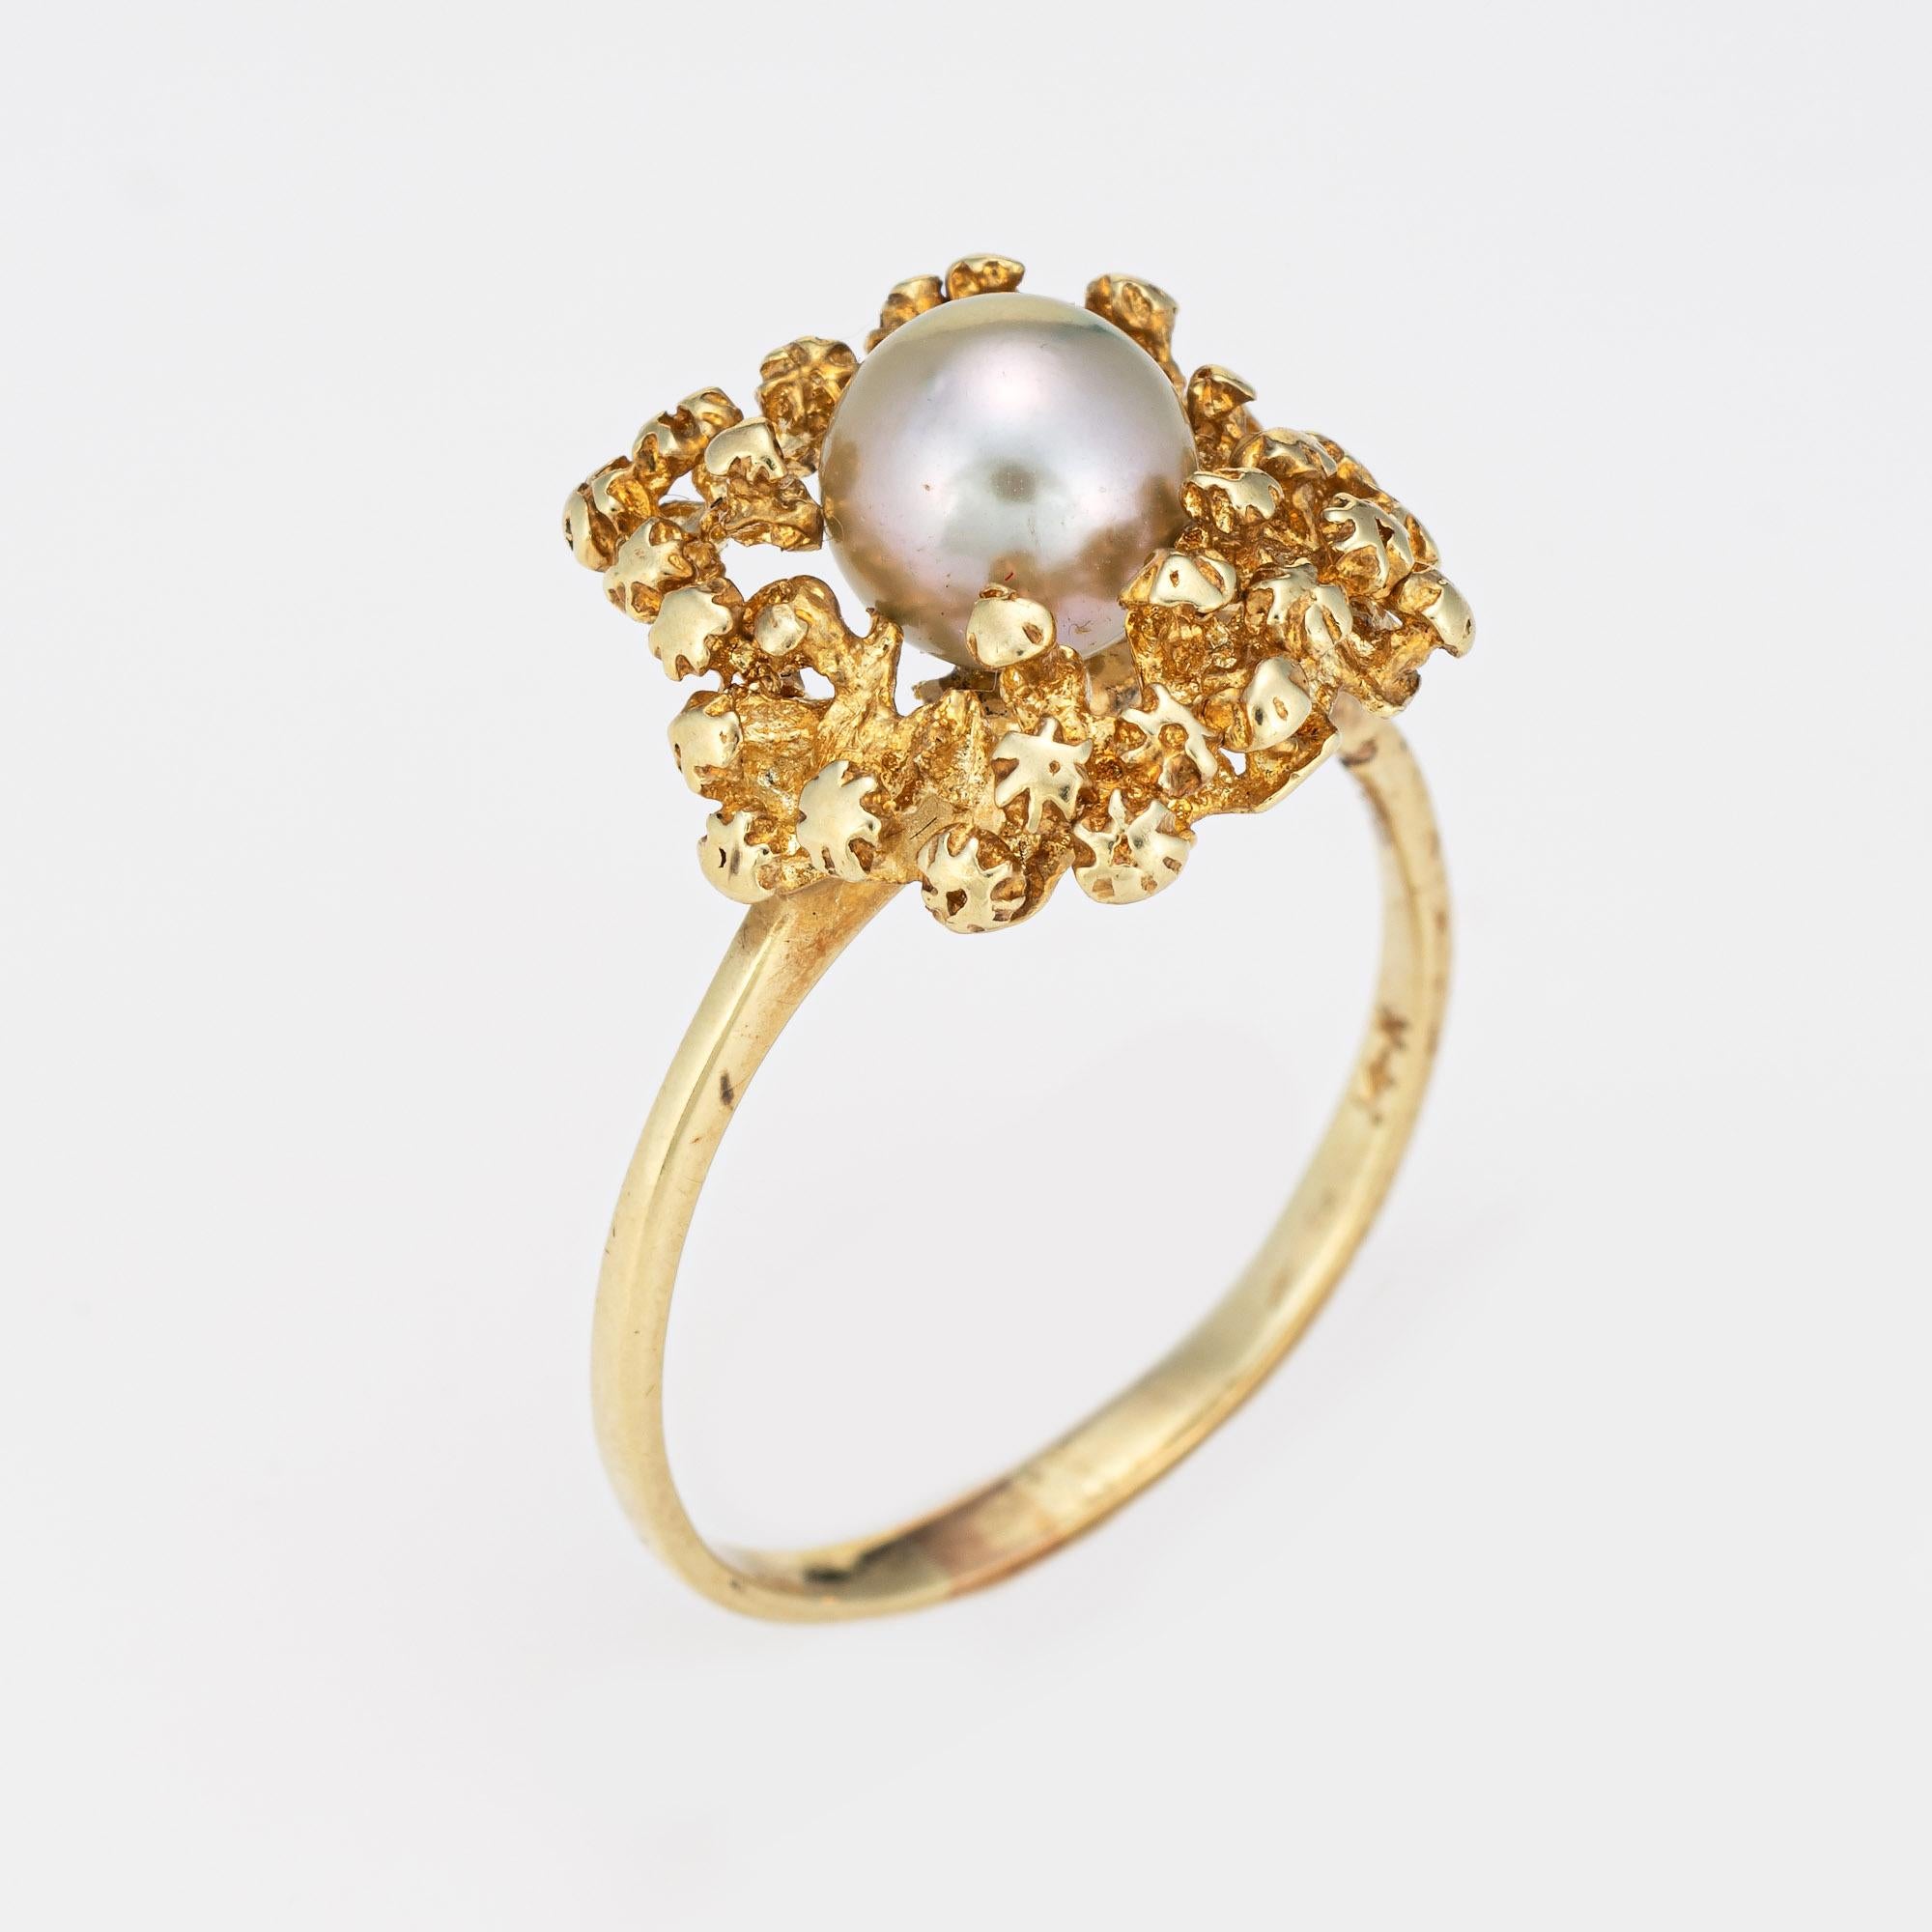 Stylish vintage cultured pearl ring (circa 1970s) crafted in 14 karat yellow gold. 

One 6.5mm cultured pearl is set into the mount. The pearl is a light silver grey color and exhibits good luster.  

The soft grey pearl is set into an abstract